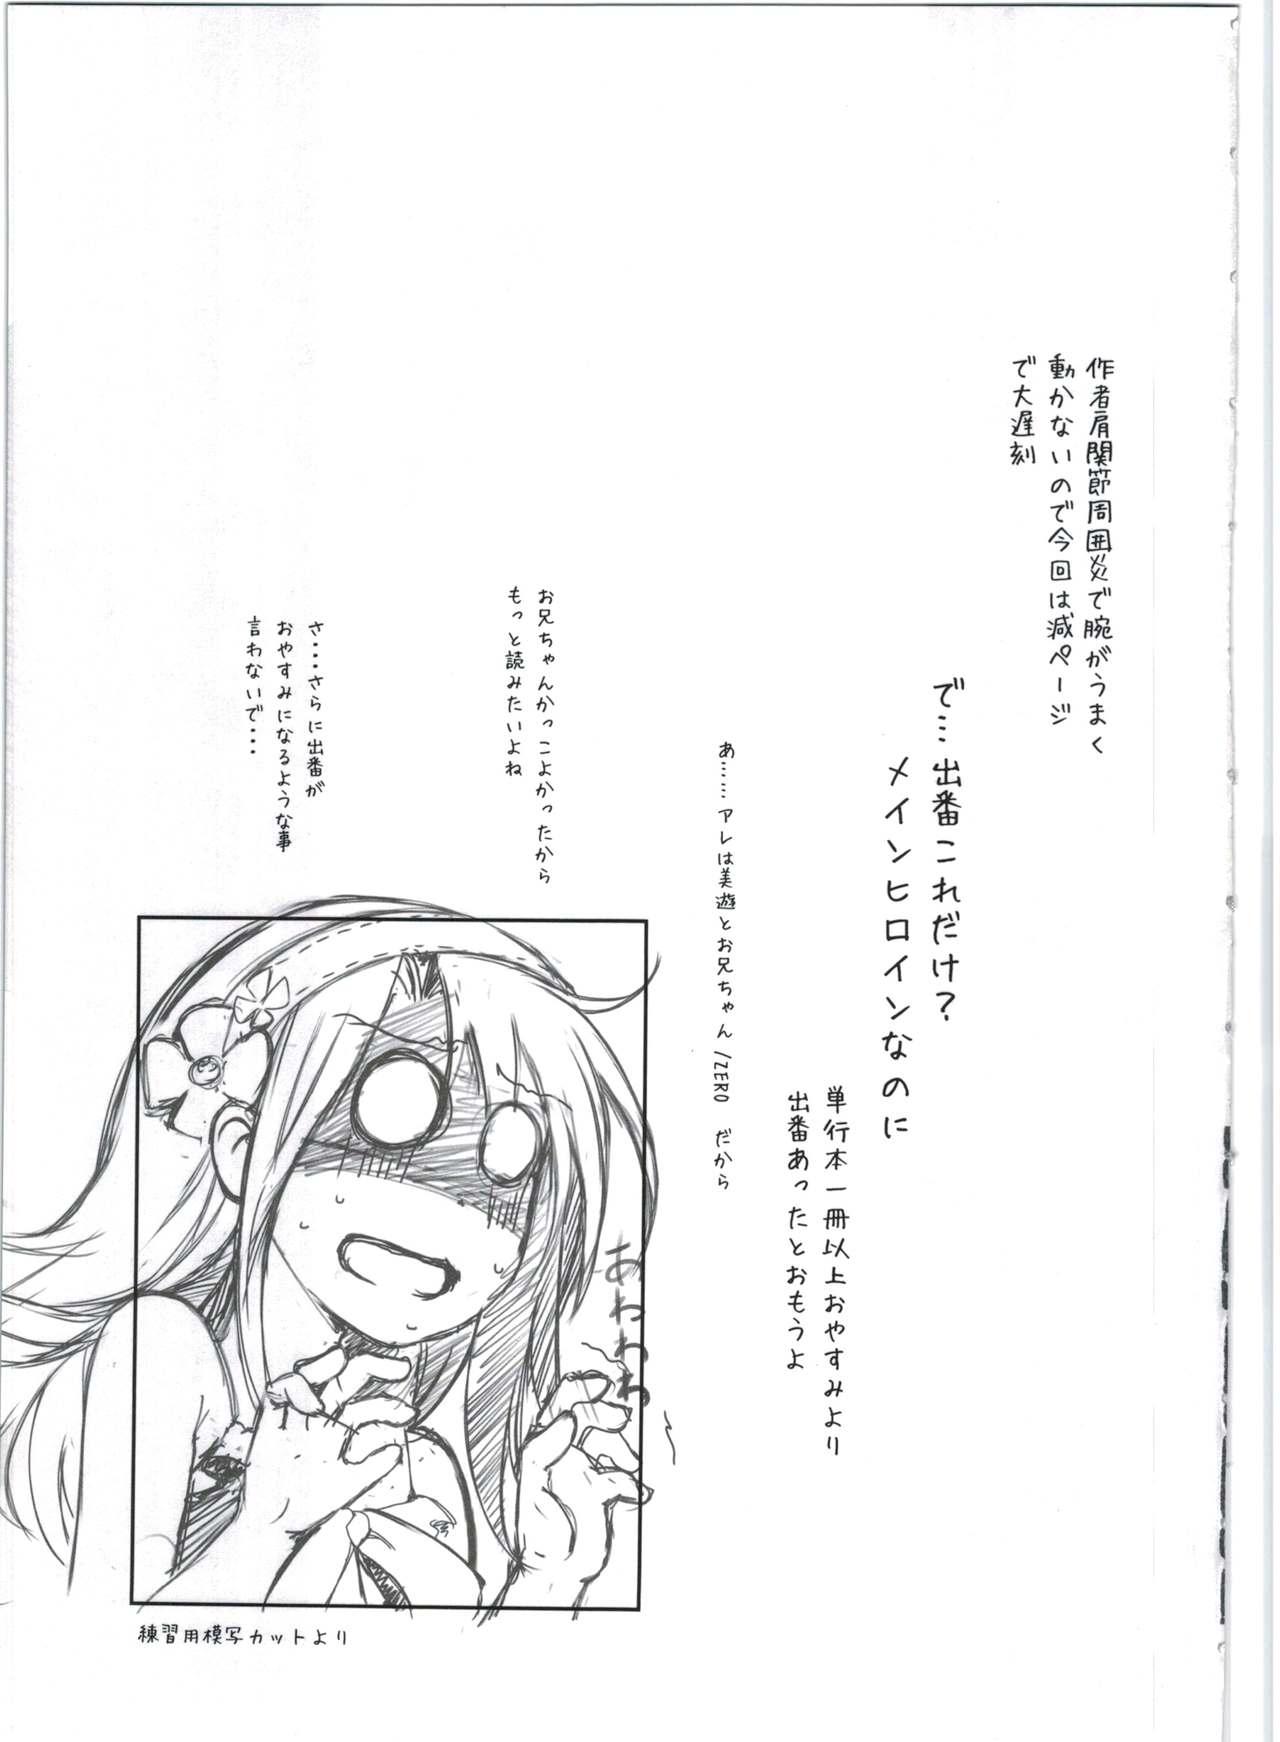 Ass Fucked SHG:03 - Fate kaleid liner prisma illya China - Page 25